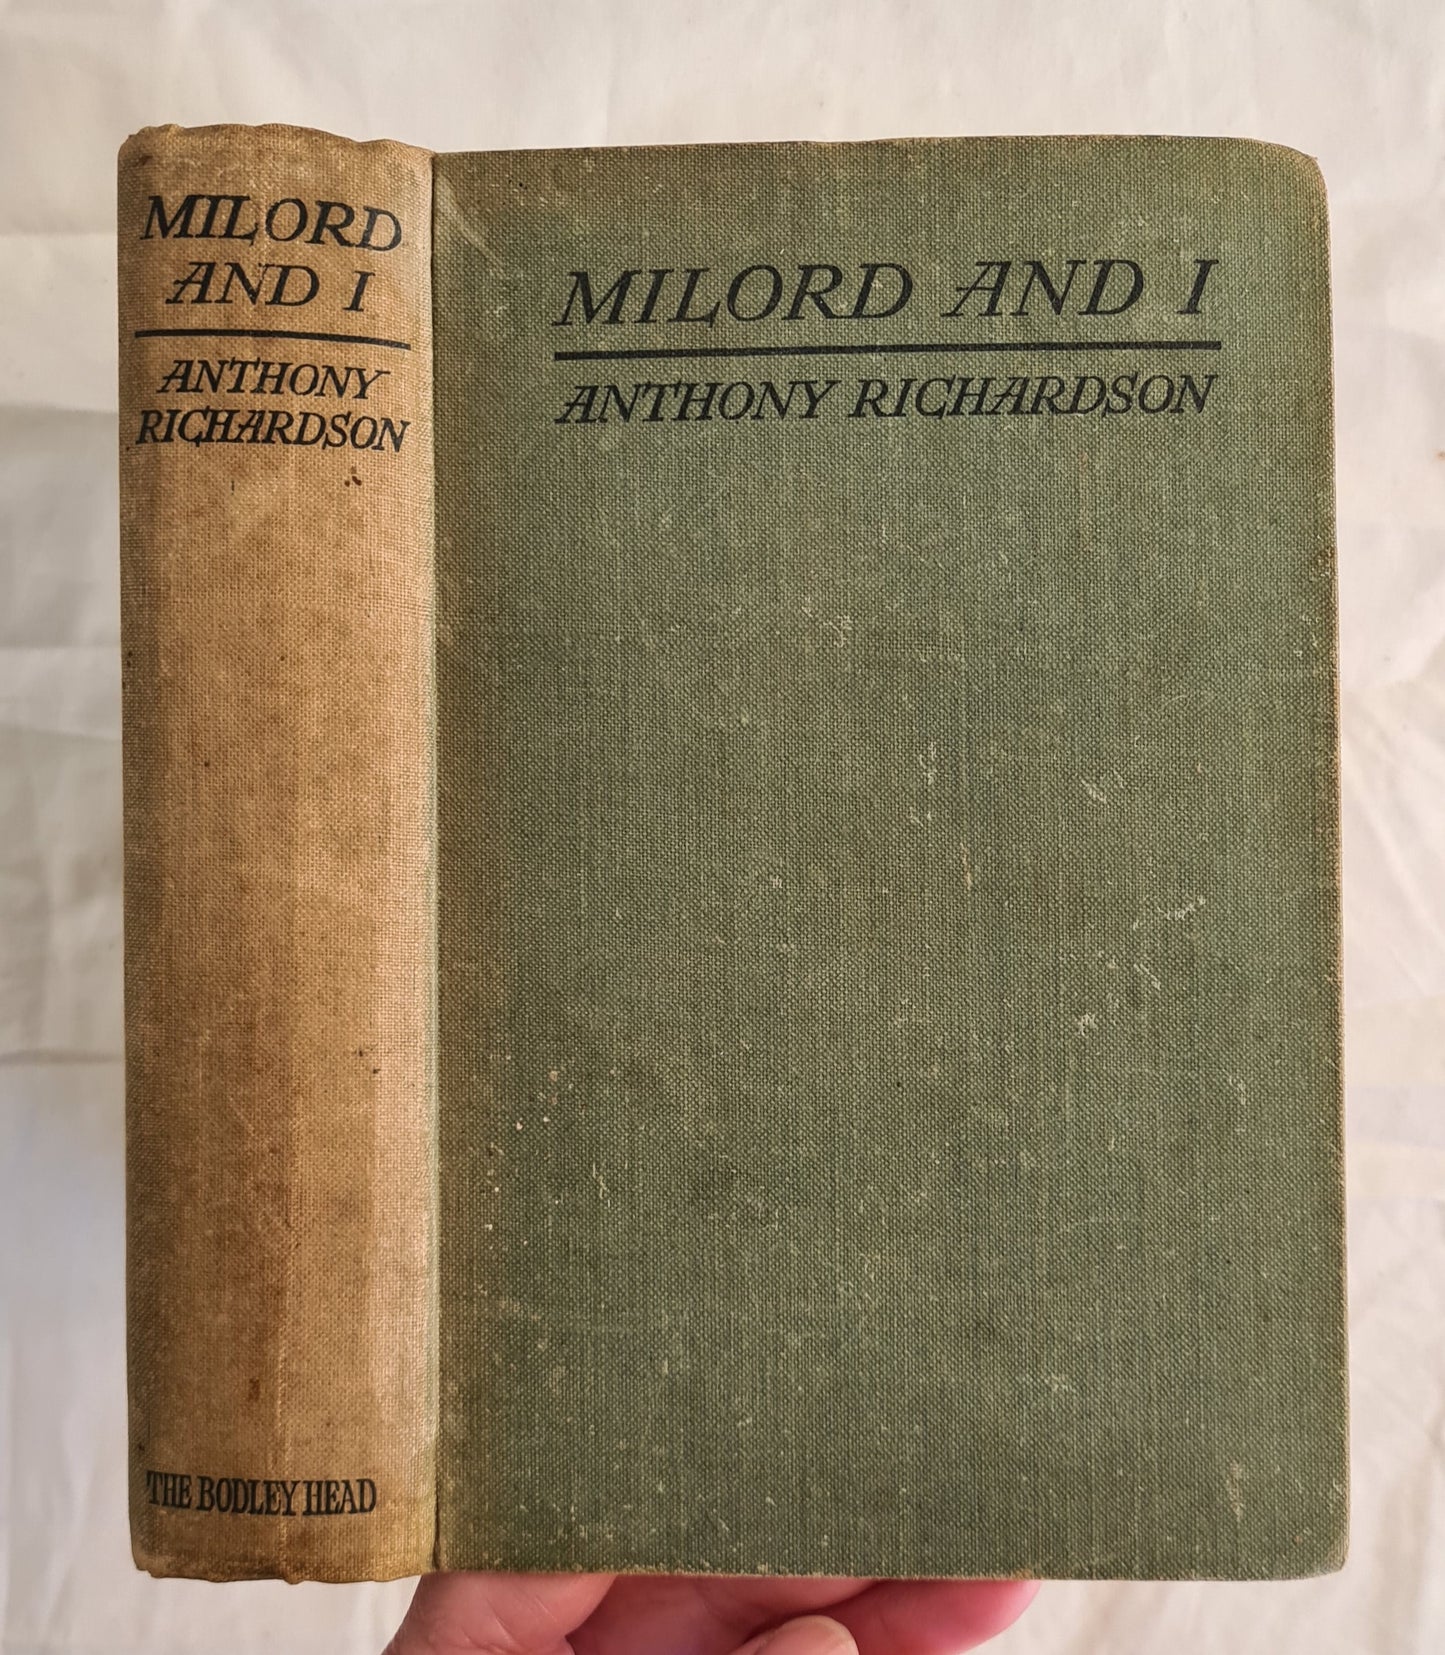 Milord and I by Anthony Richardson